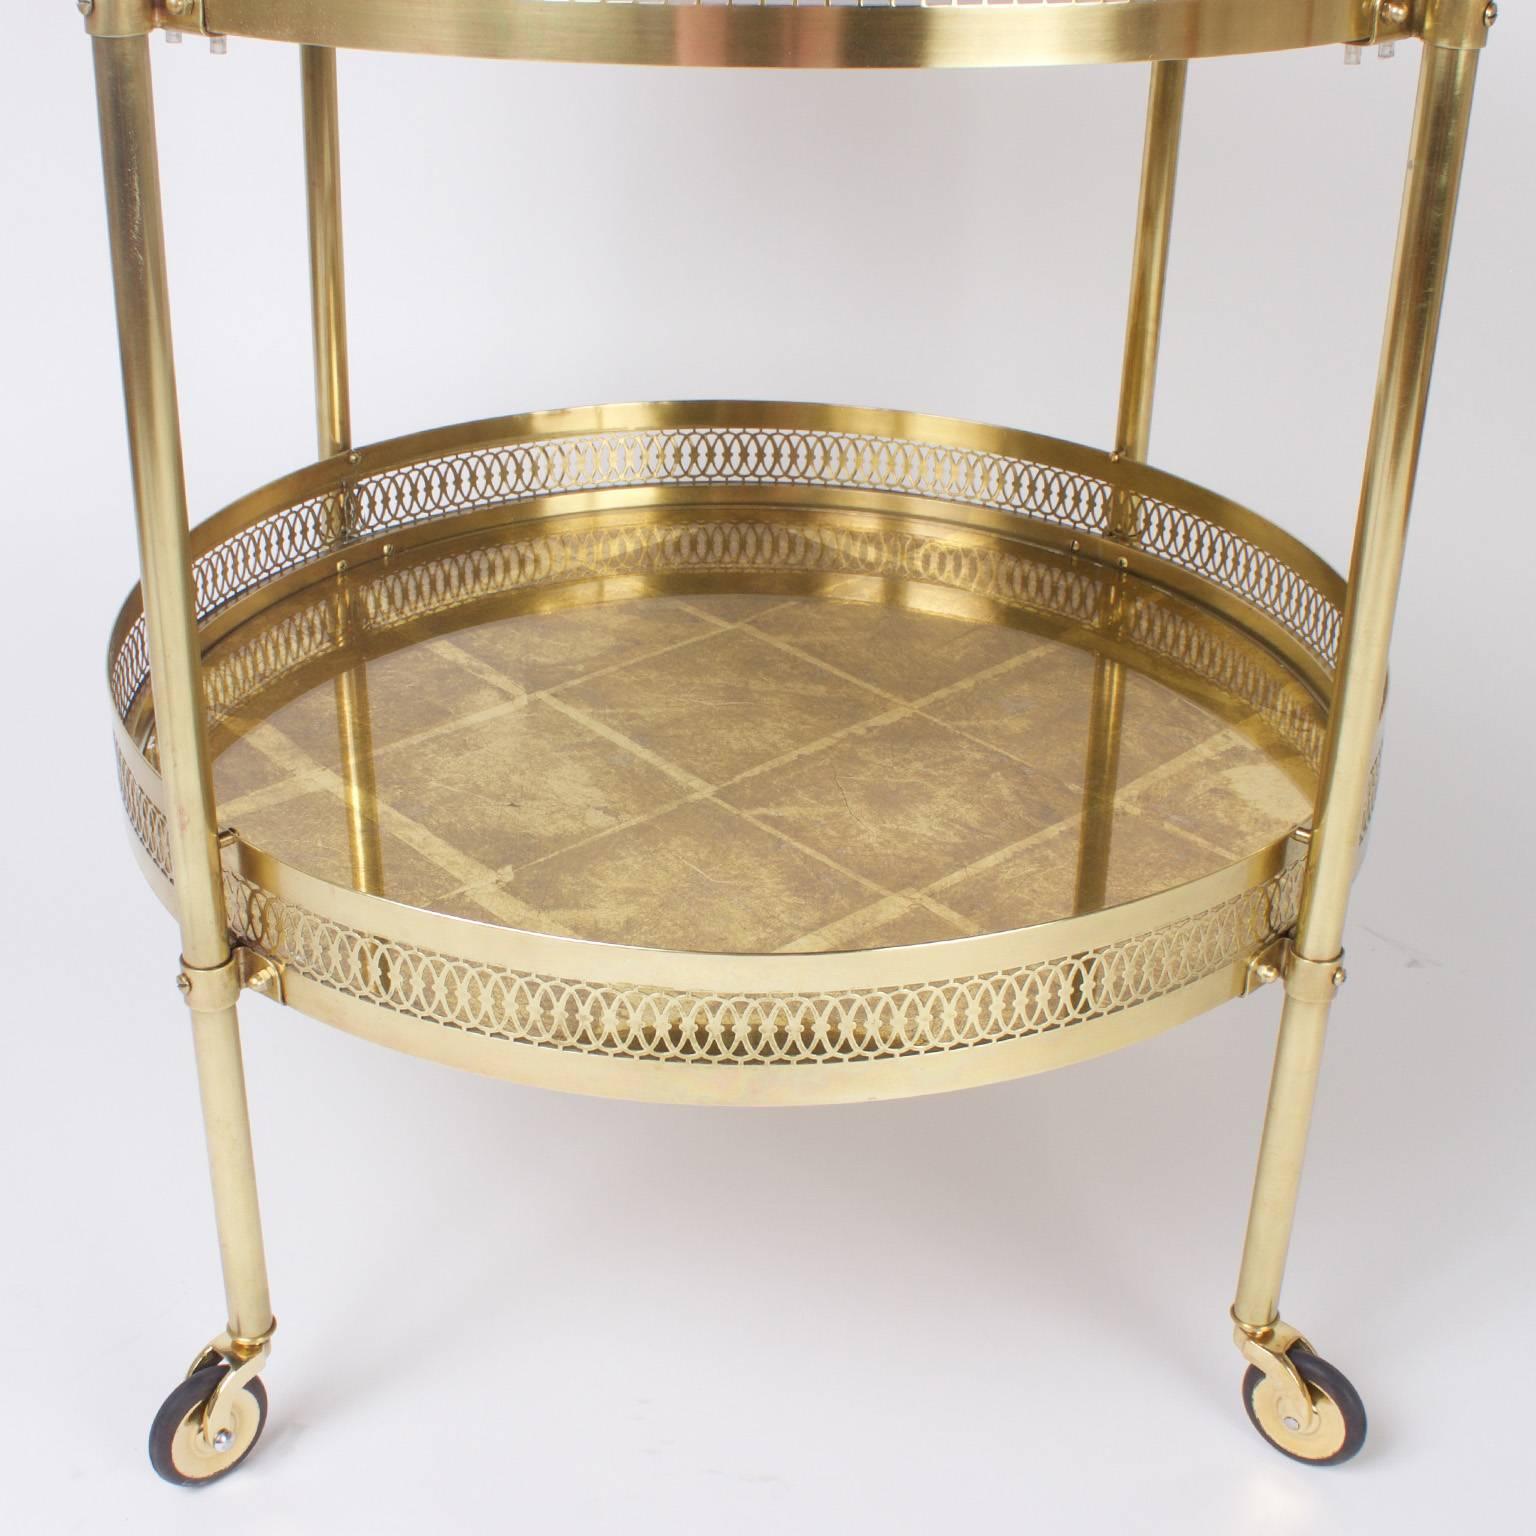 Brass Chic Pair of Mid-Century Serving Carts or Tables